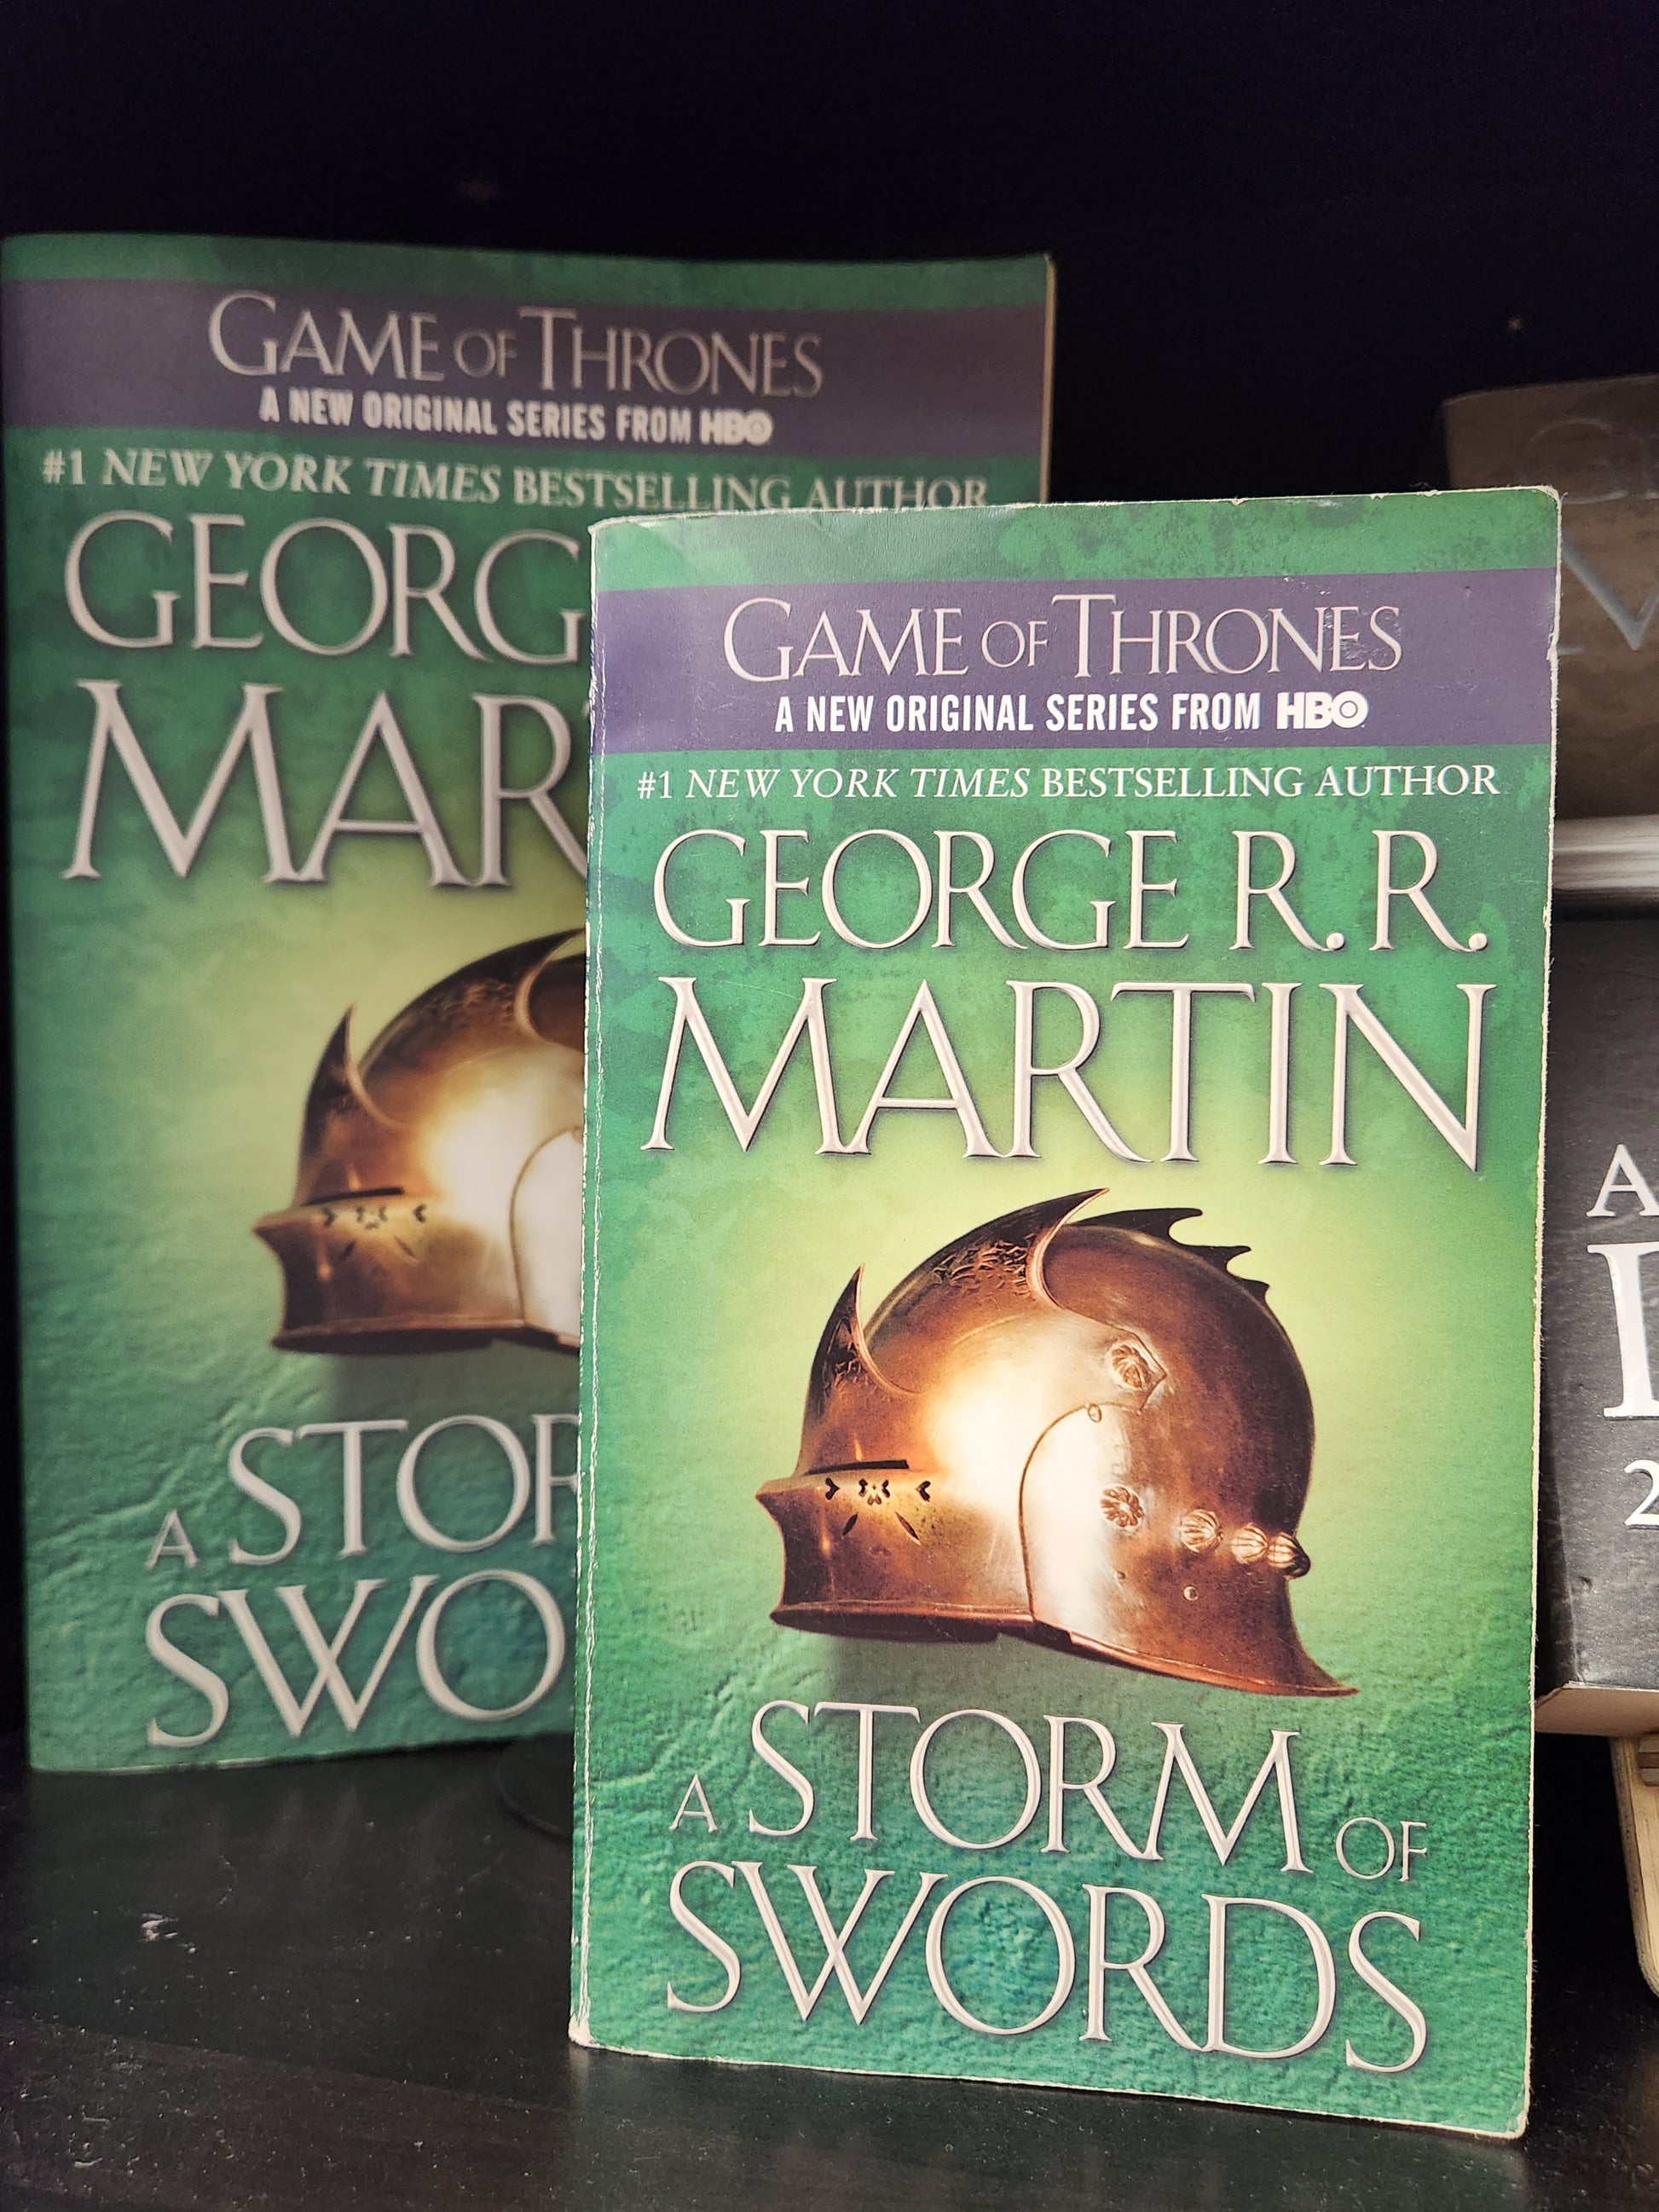 A Storm ofA Storm of Swords by George R. R. Martin Swords by George R. R. Martin - Dead Tree Dreams Bookstore